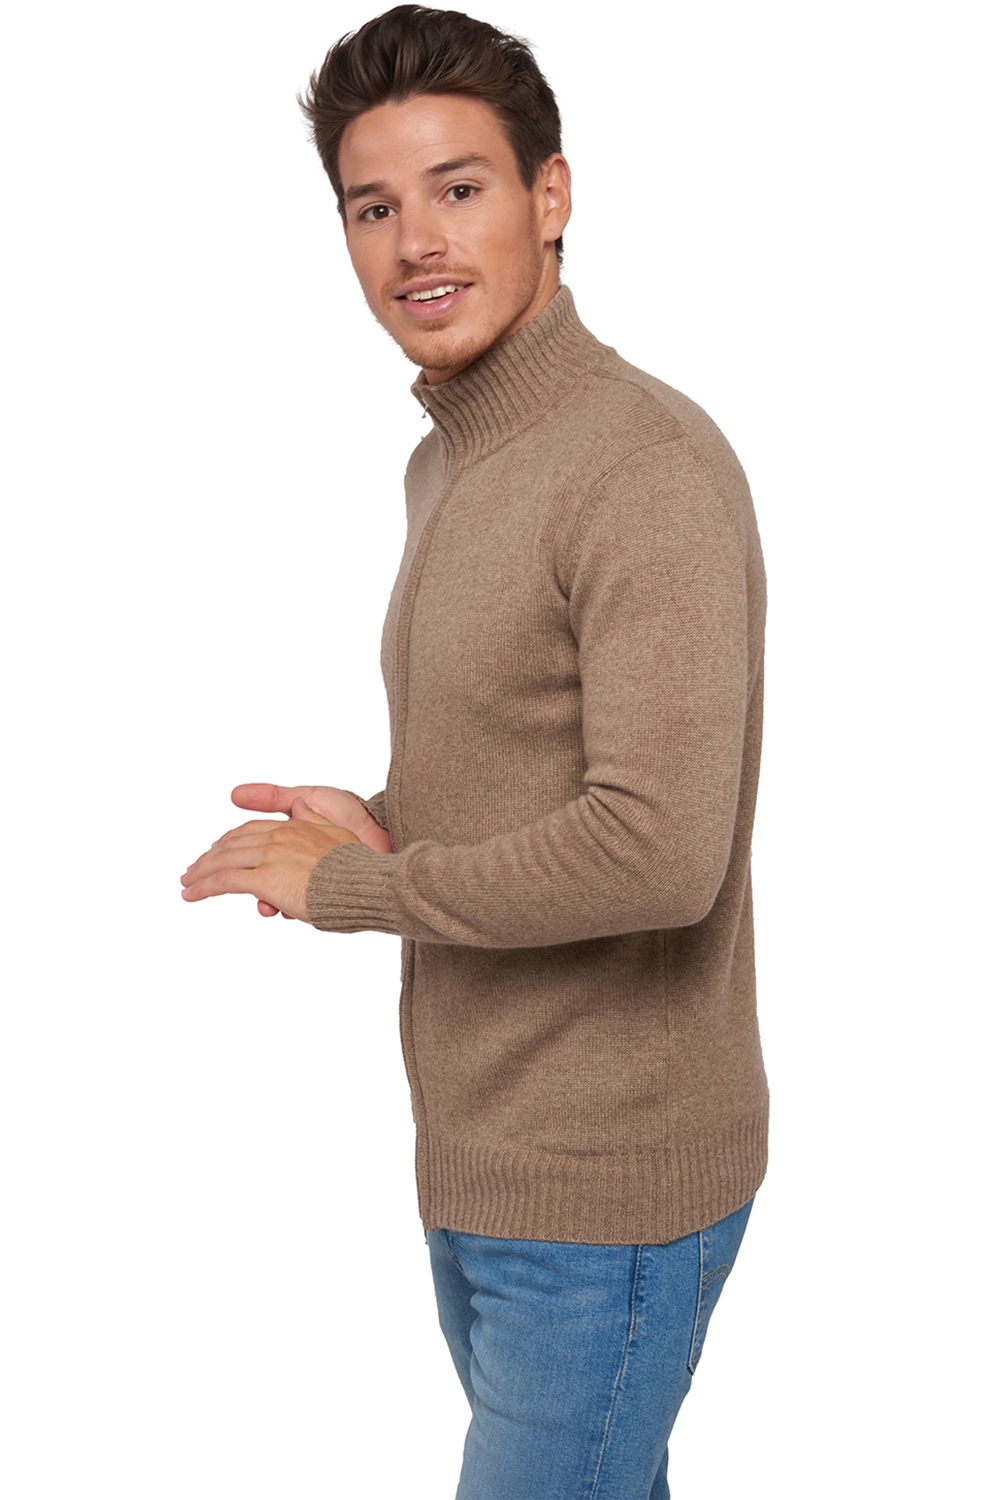 Cashmere men chunky sweater maxime natural brown natural beige 3xl